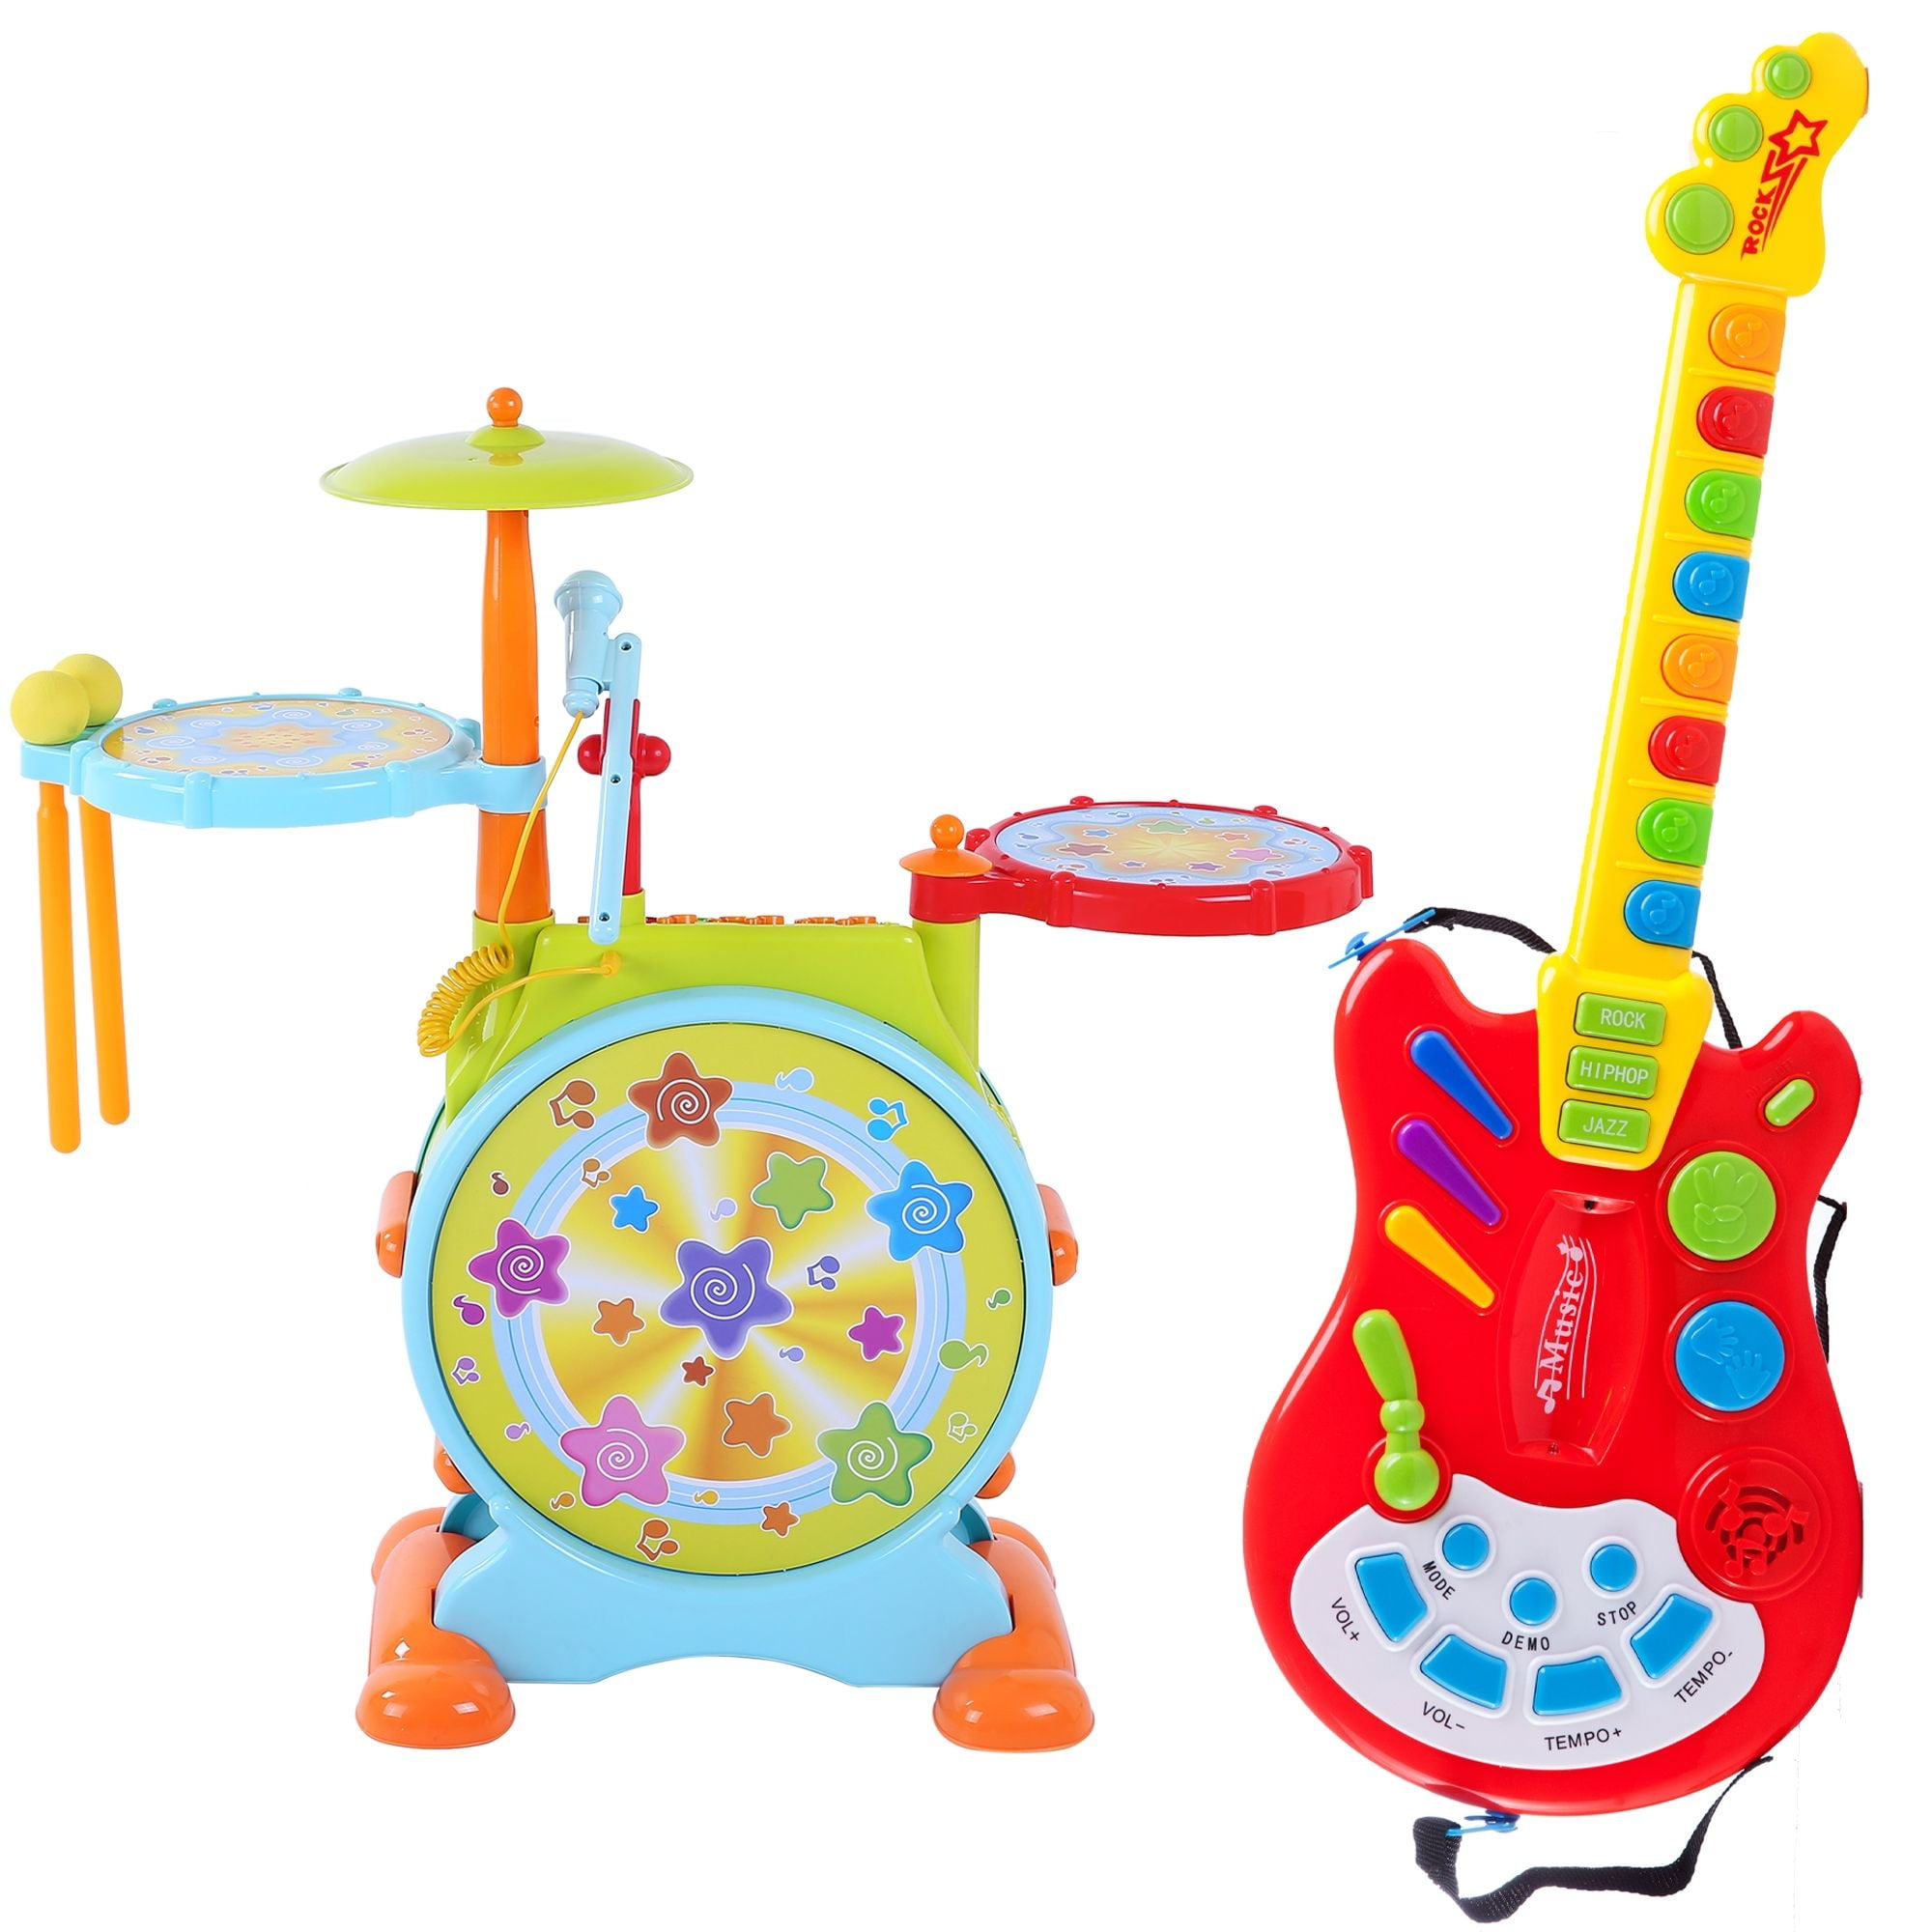 Dimple Handheld Musical Electronic Toy Guitar w/ 20 Interactive Buttons for kids 